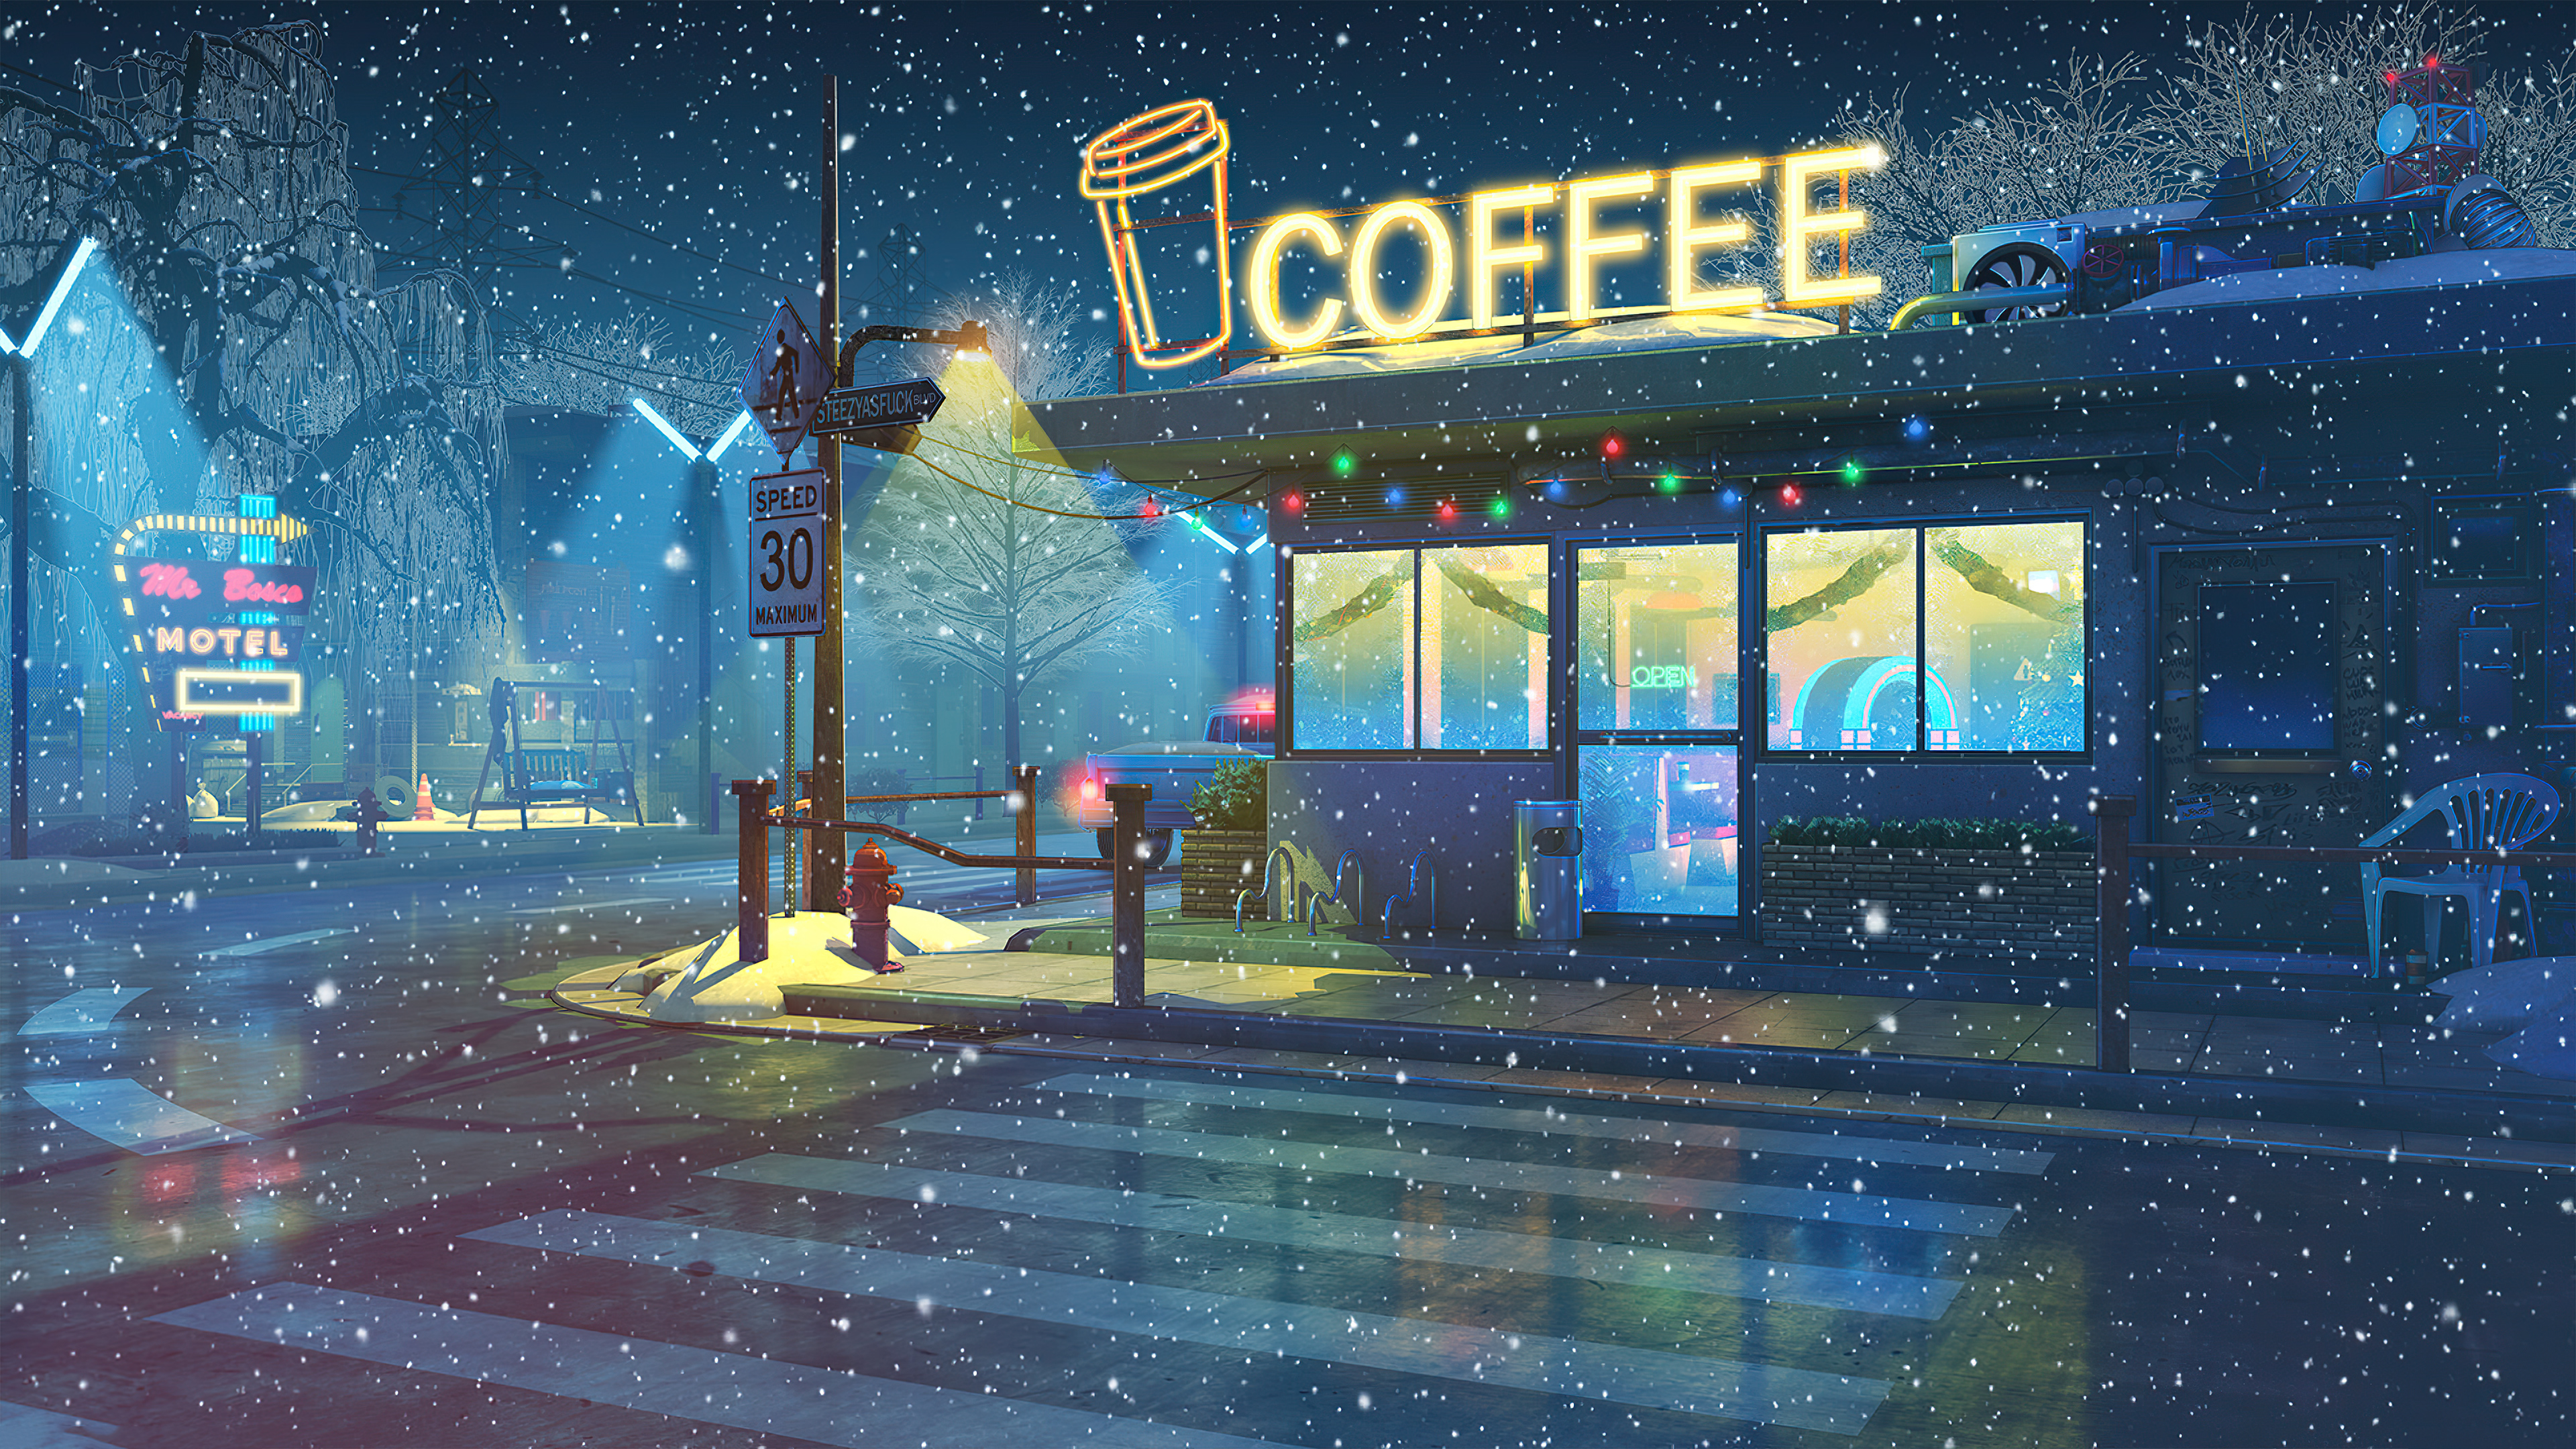 Lo Fi Cafe 4k, HD Artist, 4k Wallpapers, Images, Backgrounds, Photos